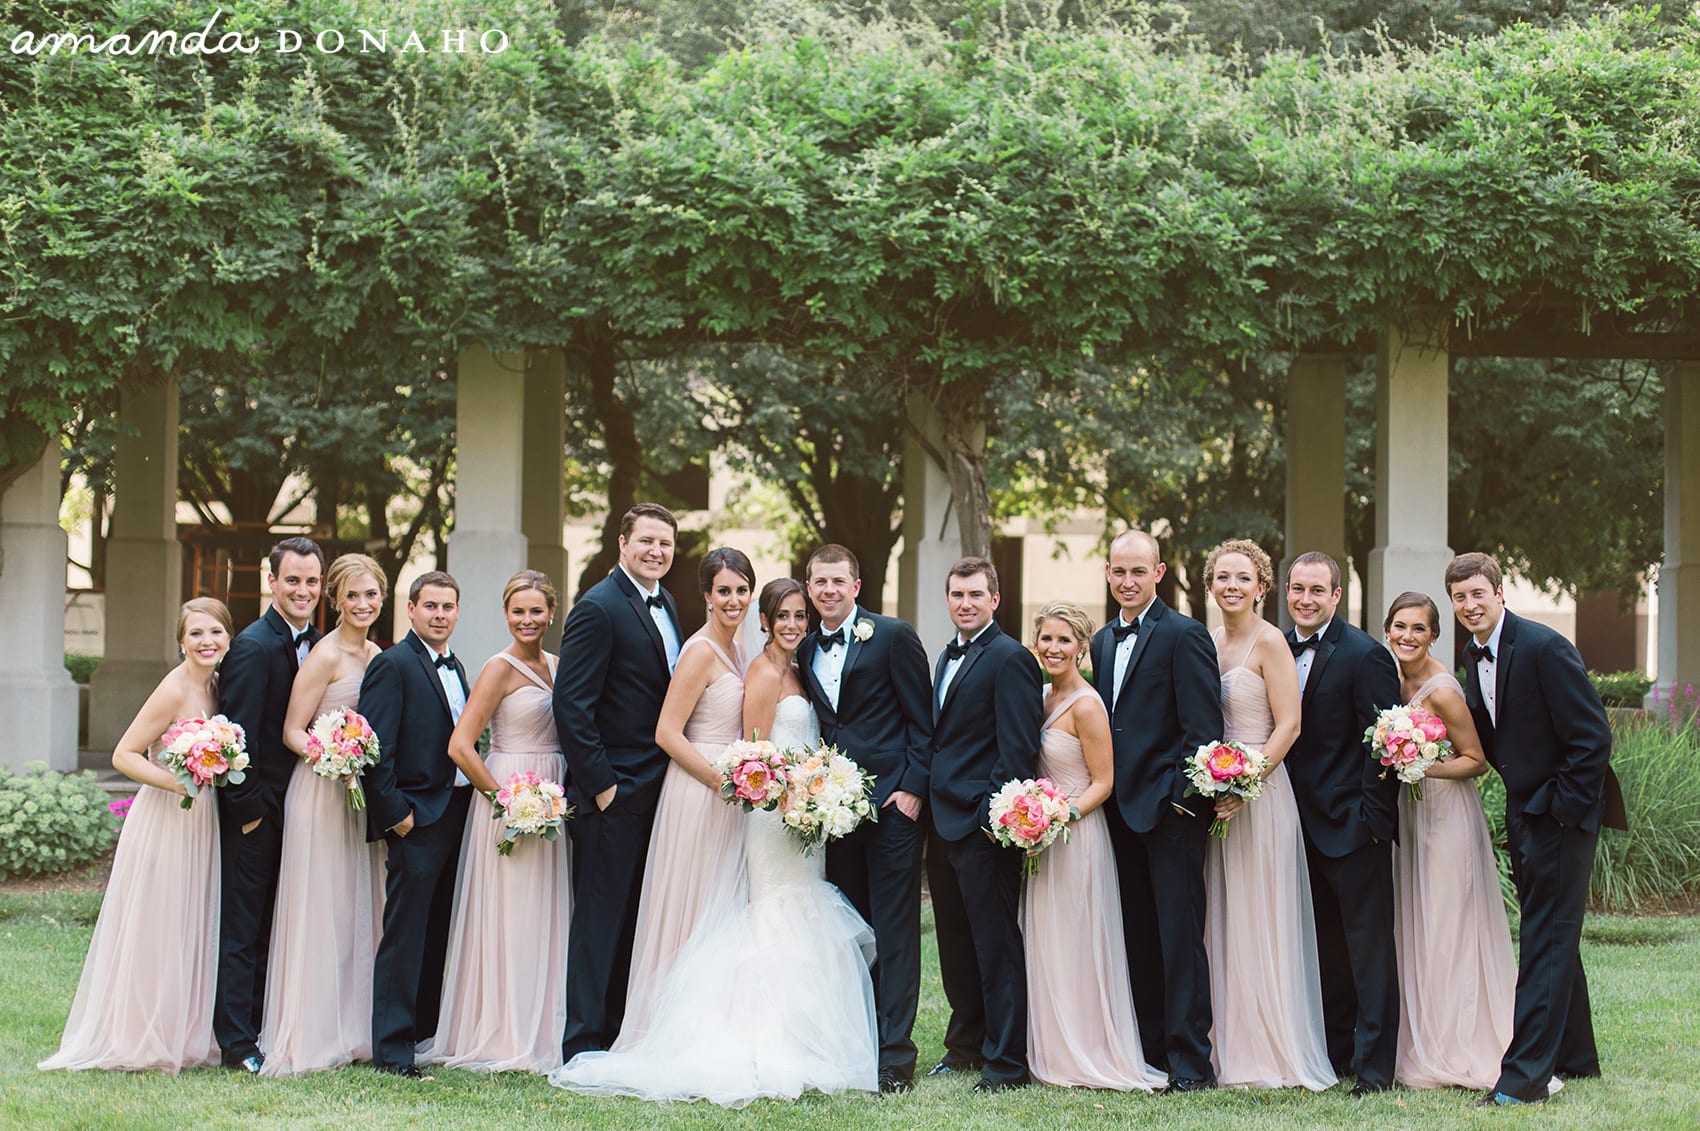 THANK YOU, bridal party - you were amazing!